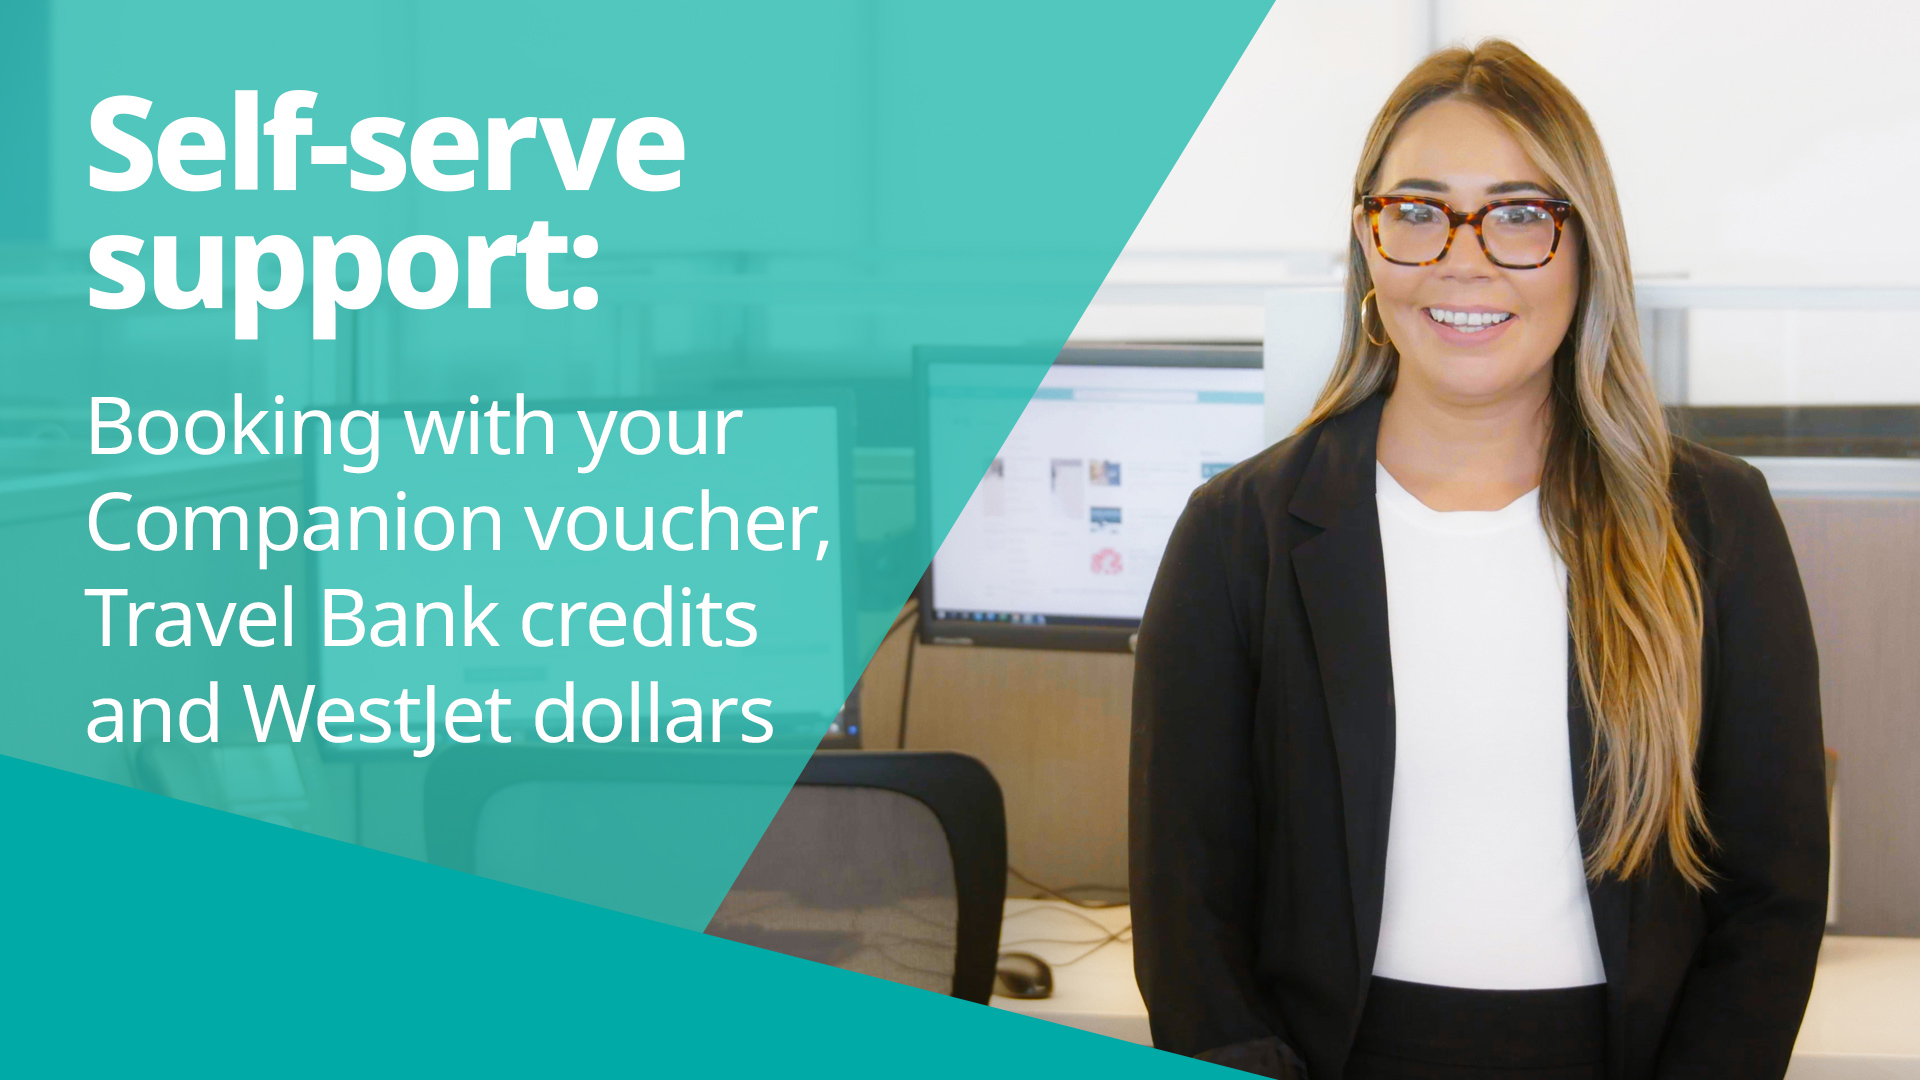 Self-serve support: Booking with your Companion voucher, Travel Bank credits and WestJet Dollars with service agent Arianna